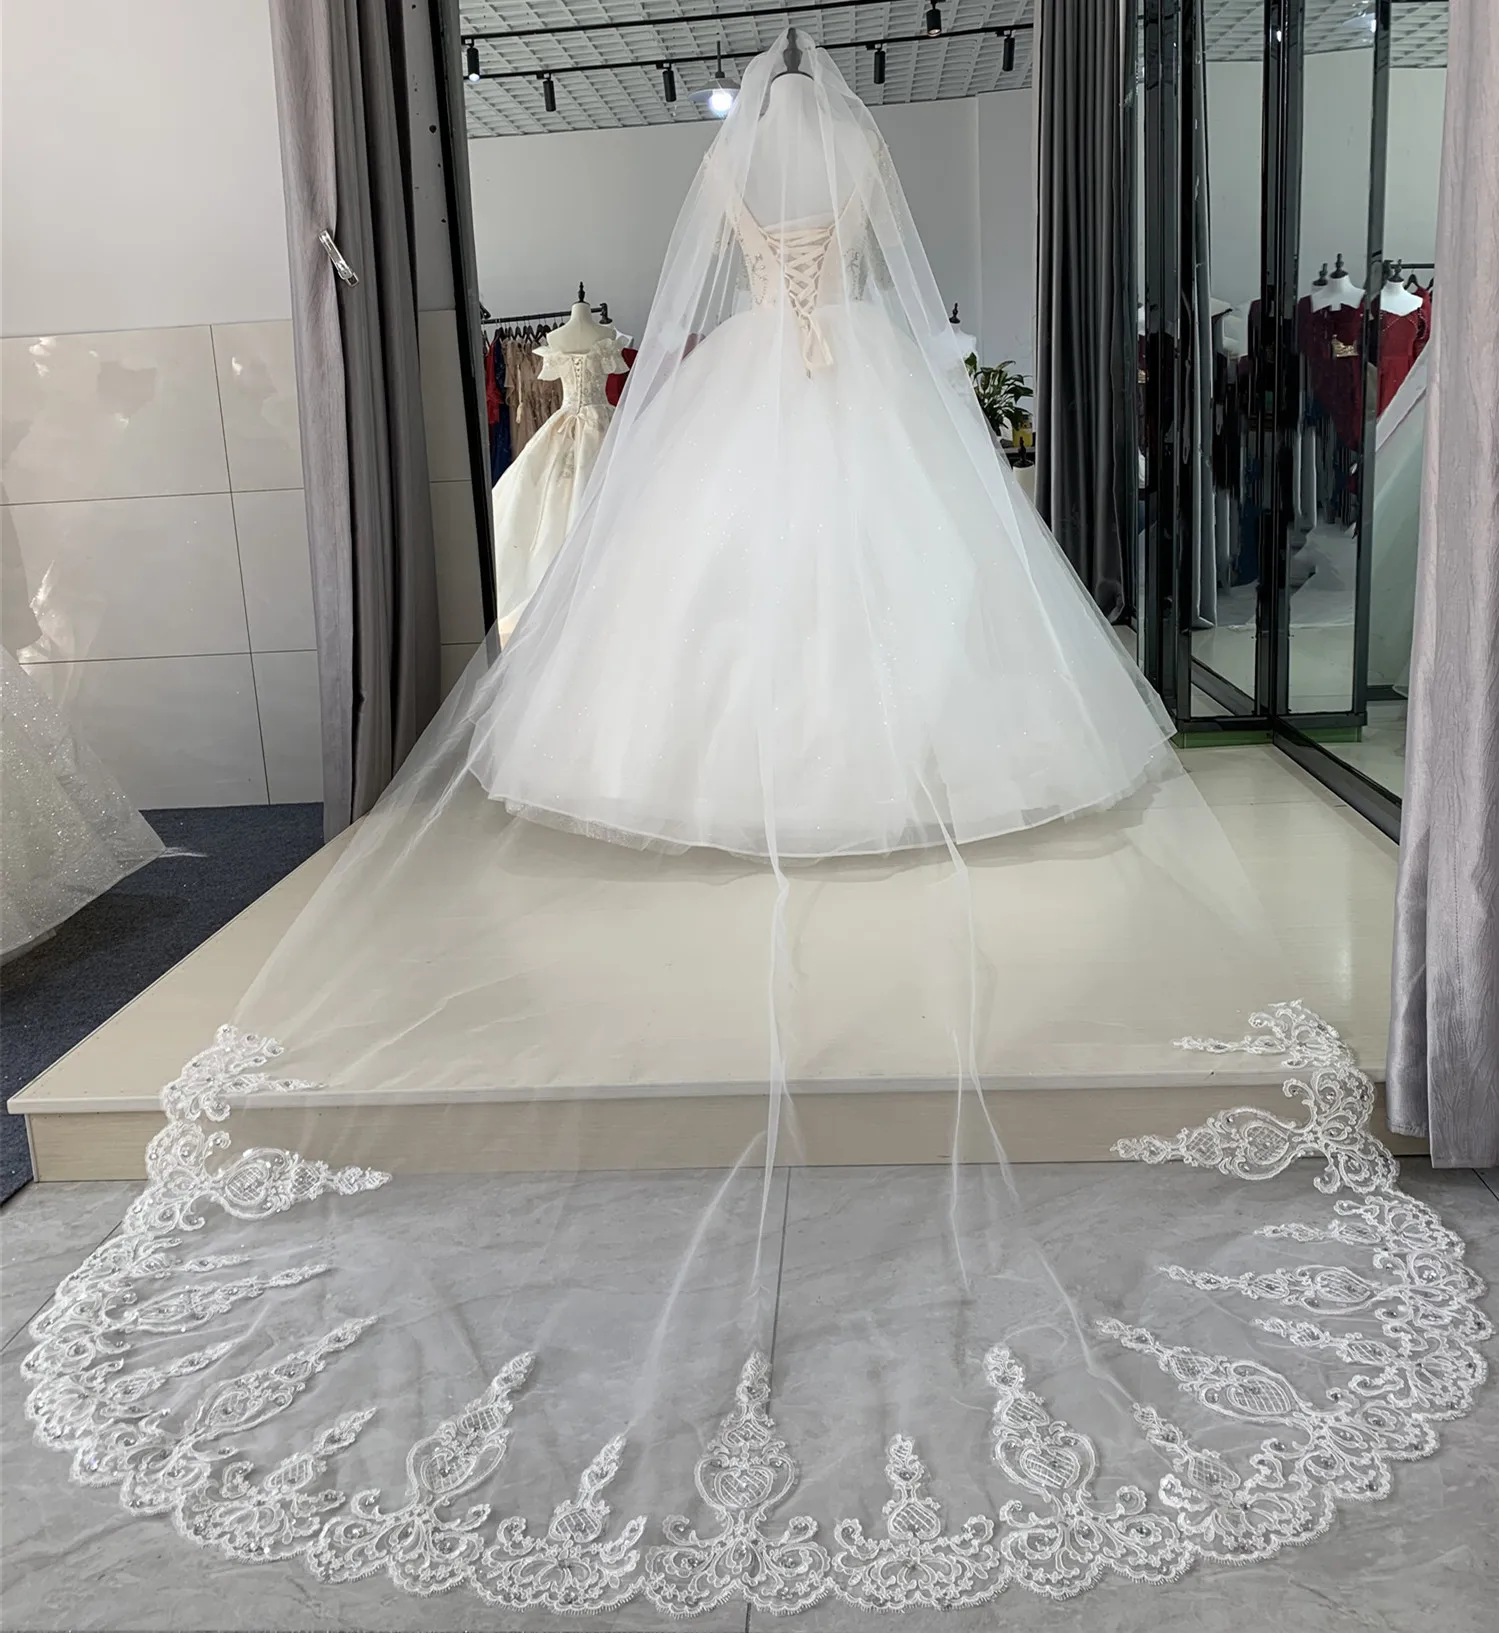 

Elegant Wedding Veil 5 Meters Long Soft Bridal Veils With Comb White 1 layers Ivory Cathedral TrainLace Appliques Bride Veils